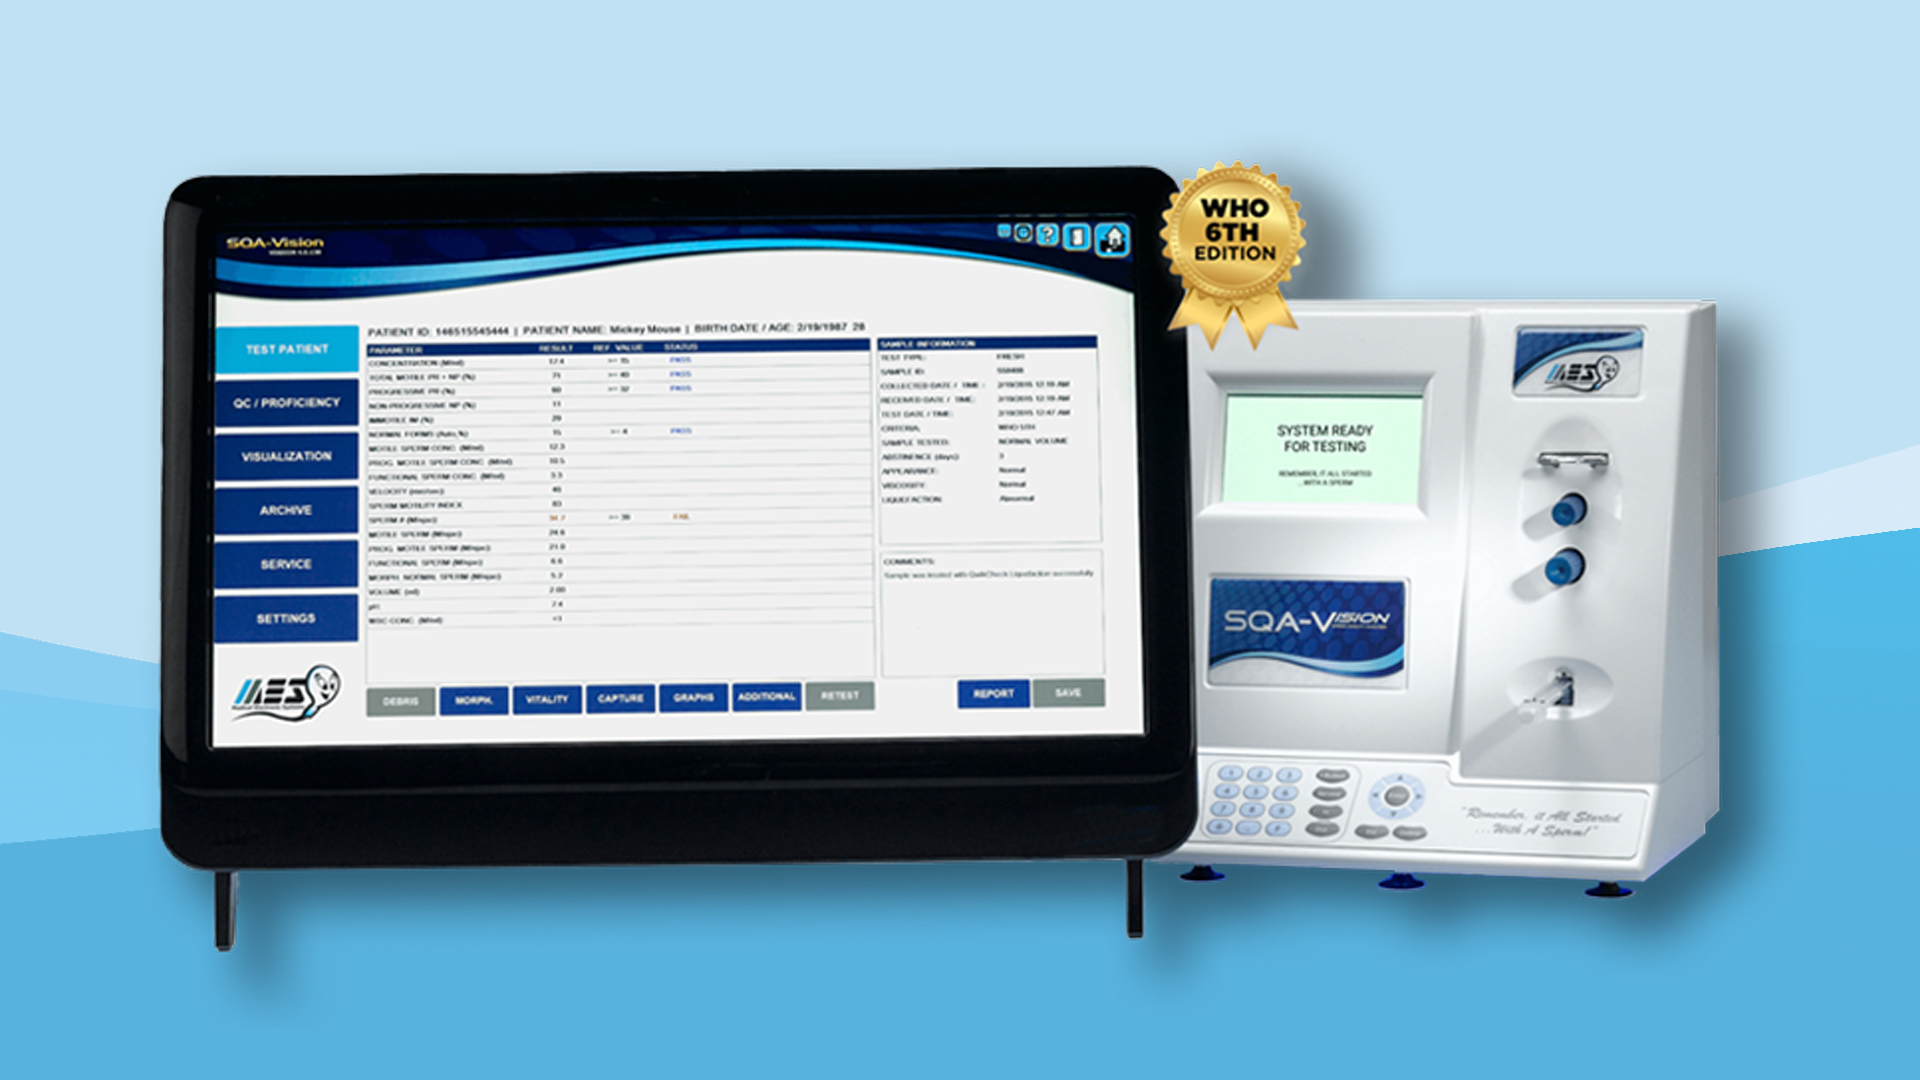 SQA-Vision automated semen analyzer — fast and simple semen testing, on-screen visualization, 5th Edition of WHO sperm parameters